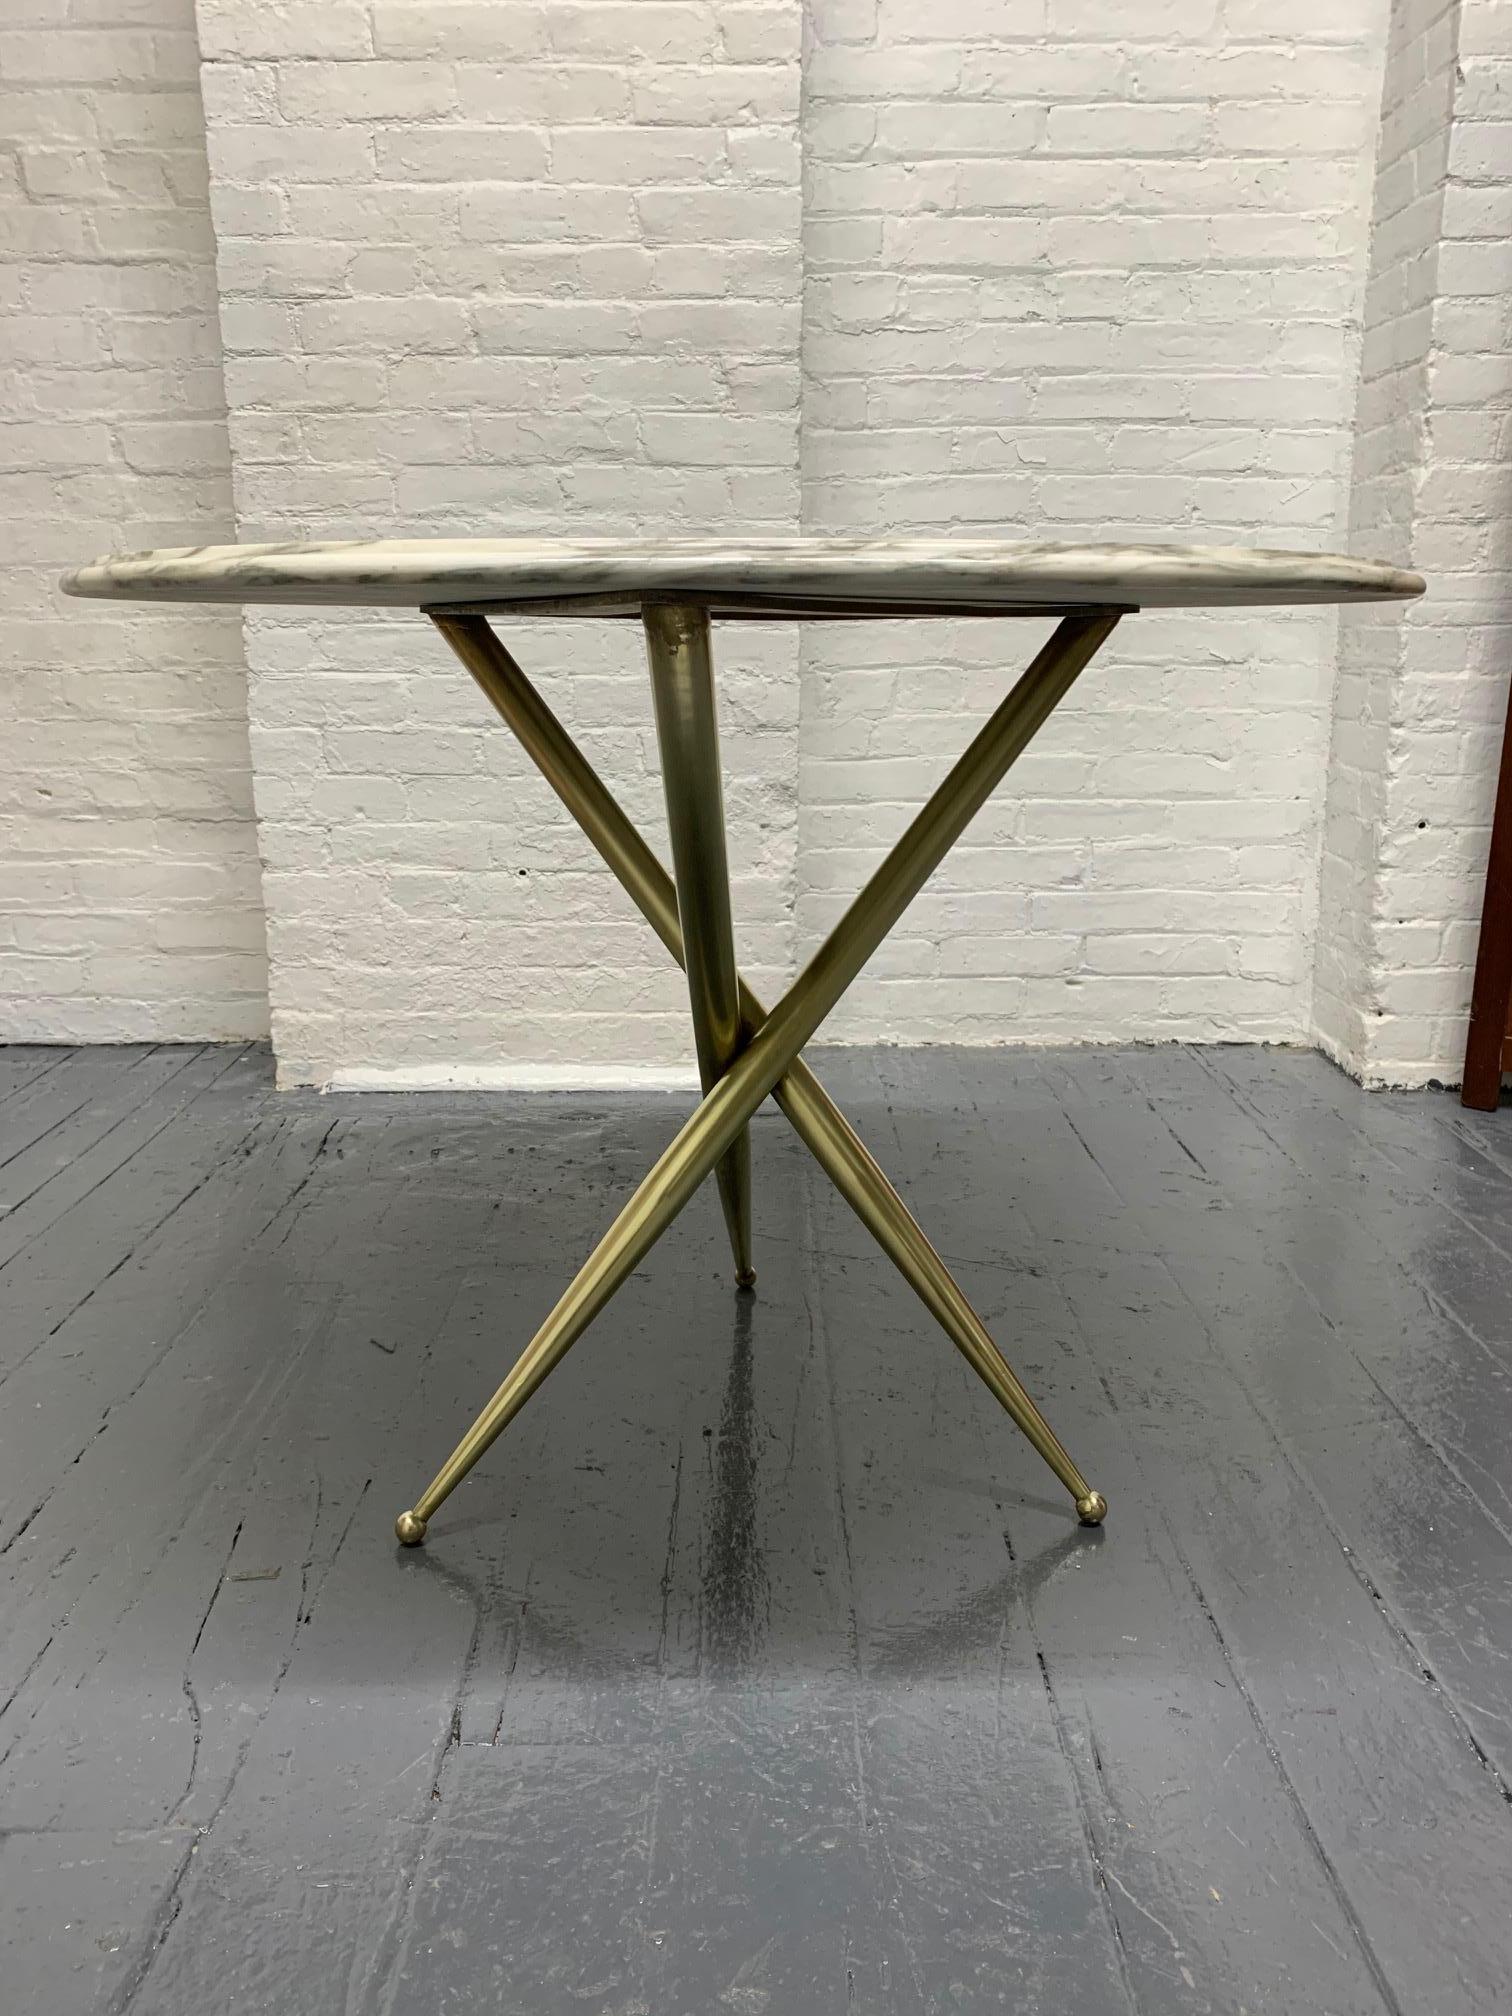 Bronze and marble-top side table in the style of Gio Ponti. Has bronze tri-pod legs with ball feet.